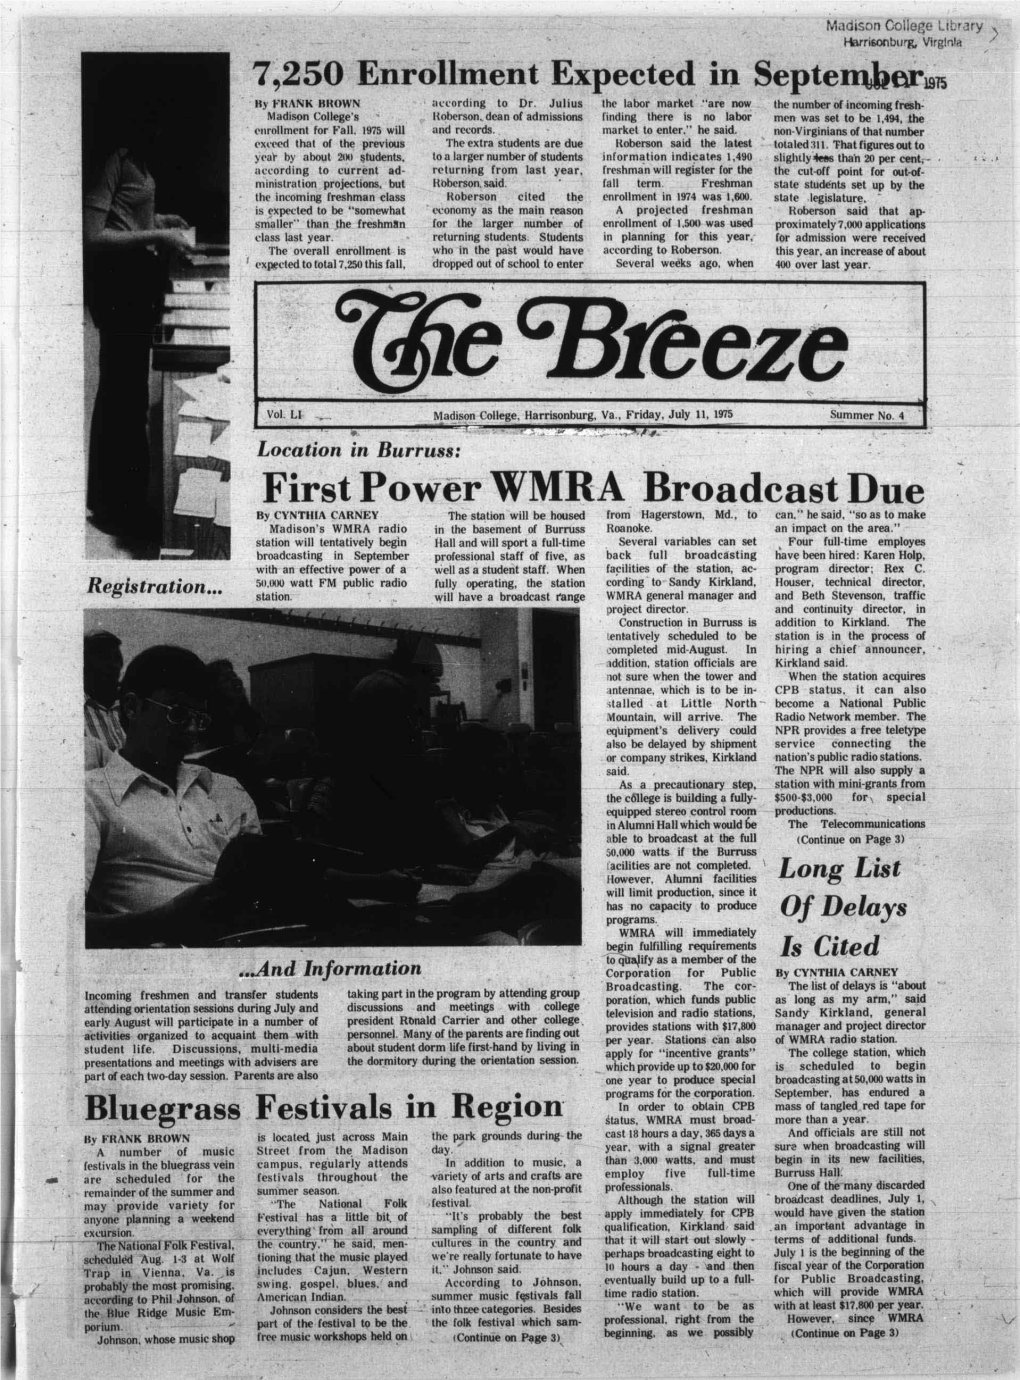 First Power WMRA ·Broadcast